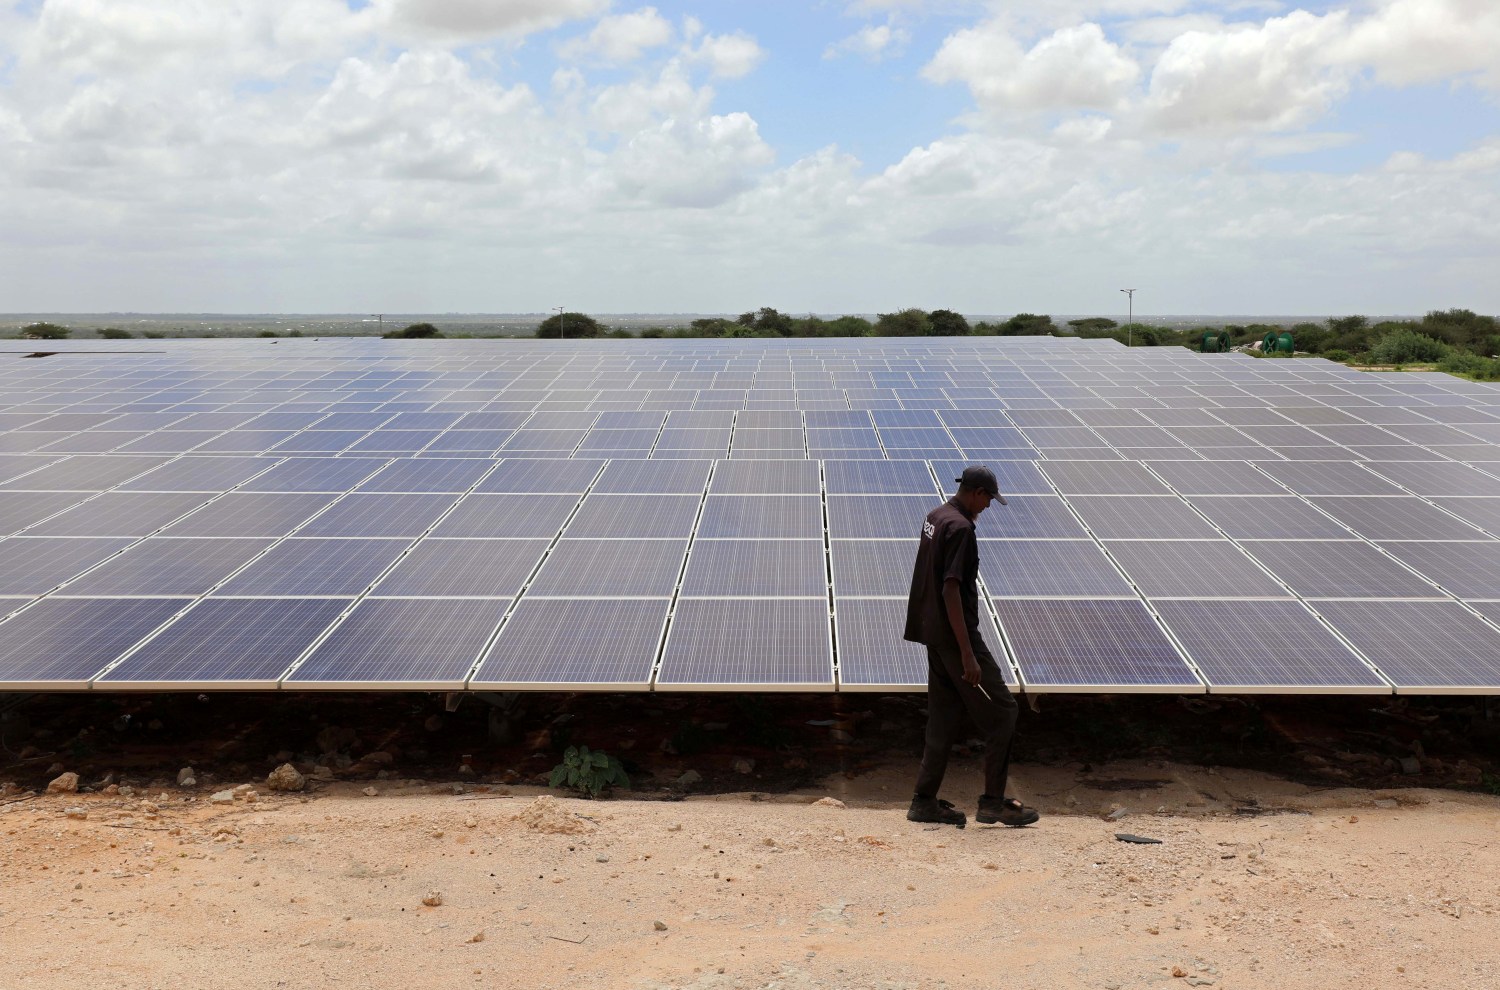 A engineer walks past the solar panels at the Benadir Electricity Company (BECO) solar project in Mogadishu, Somalia May 21, 2020. Picture taken May 21, 2020. REUTERS/Feisal Omar